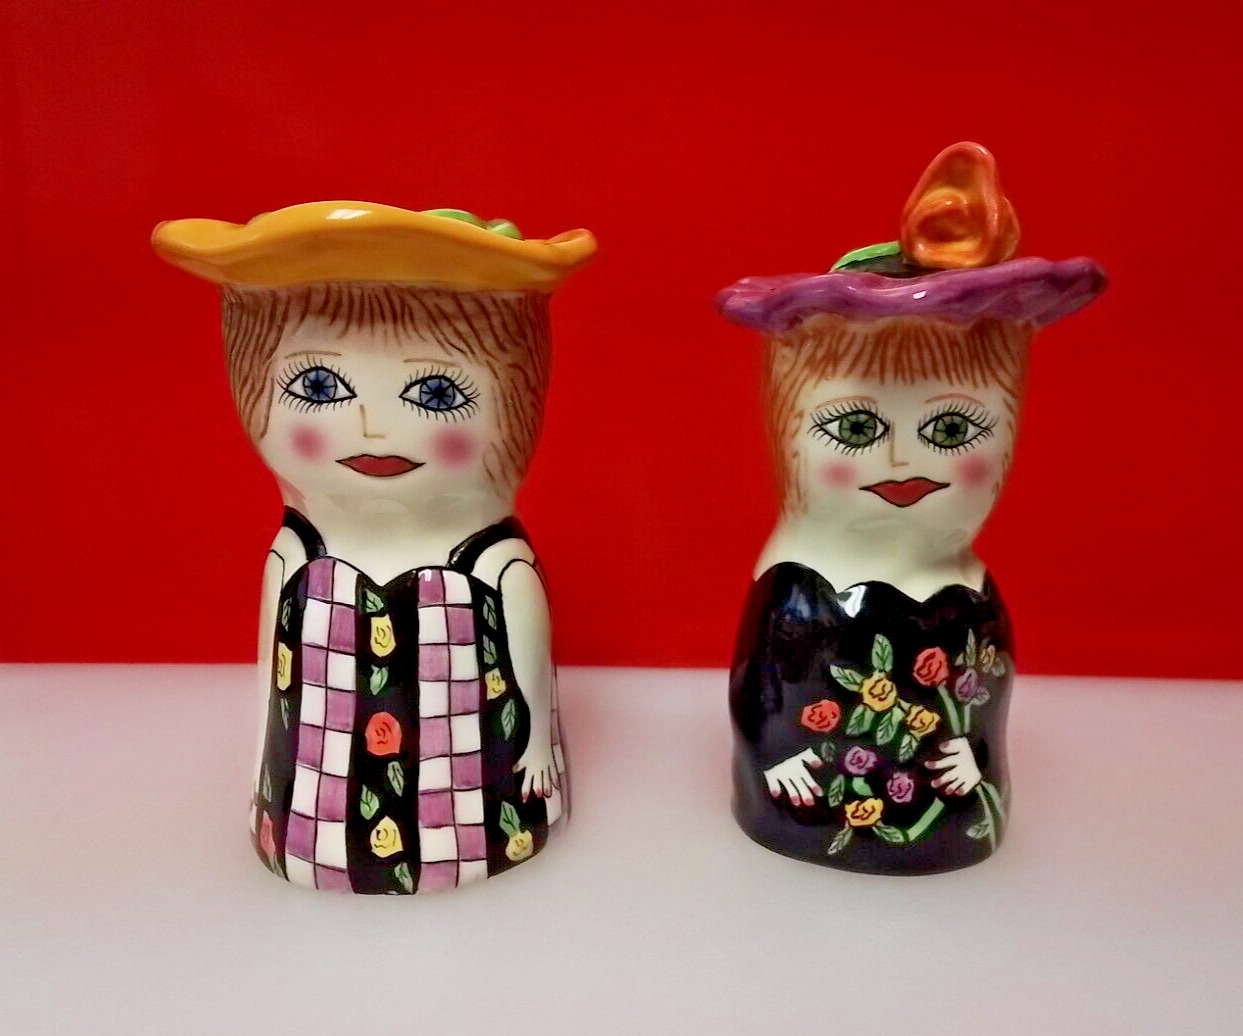 VINTAGE GANZ SUSAN PALEY SALT AND PEPPER SHAKERS MICHELLE AND JANE